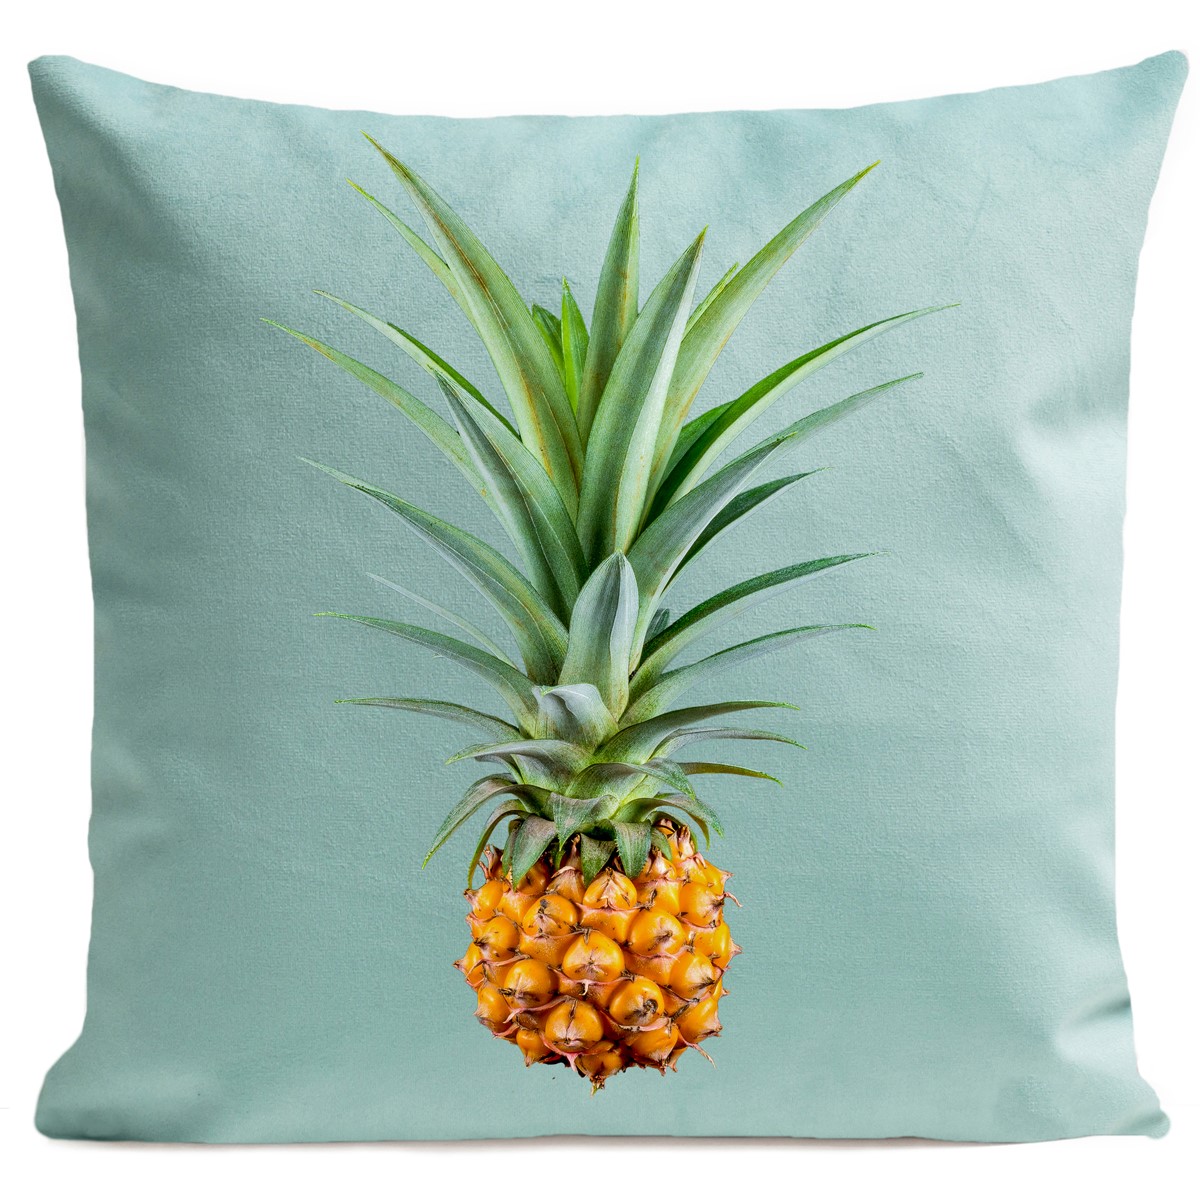 Coussin MR PINEAPPLE